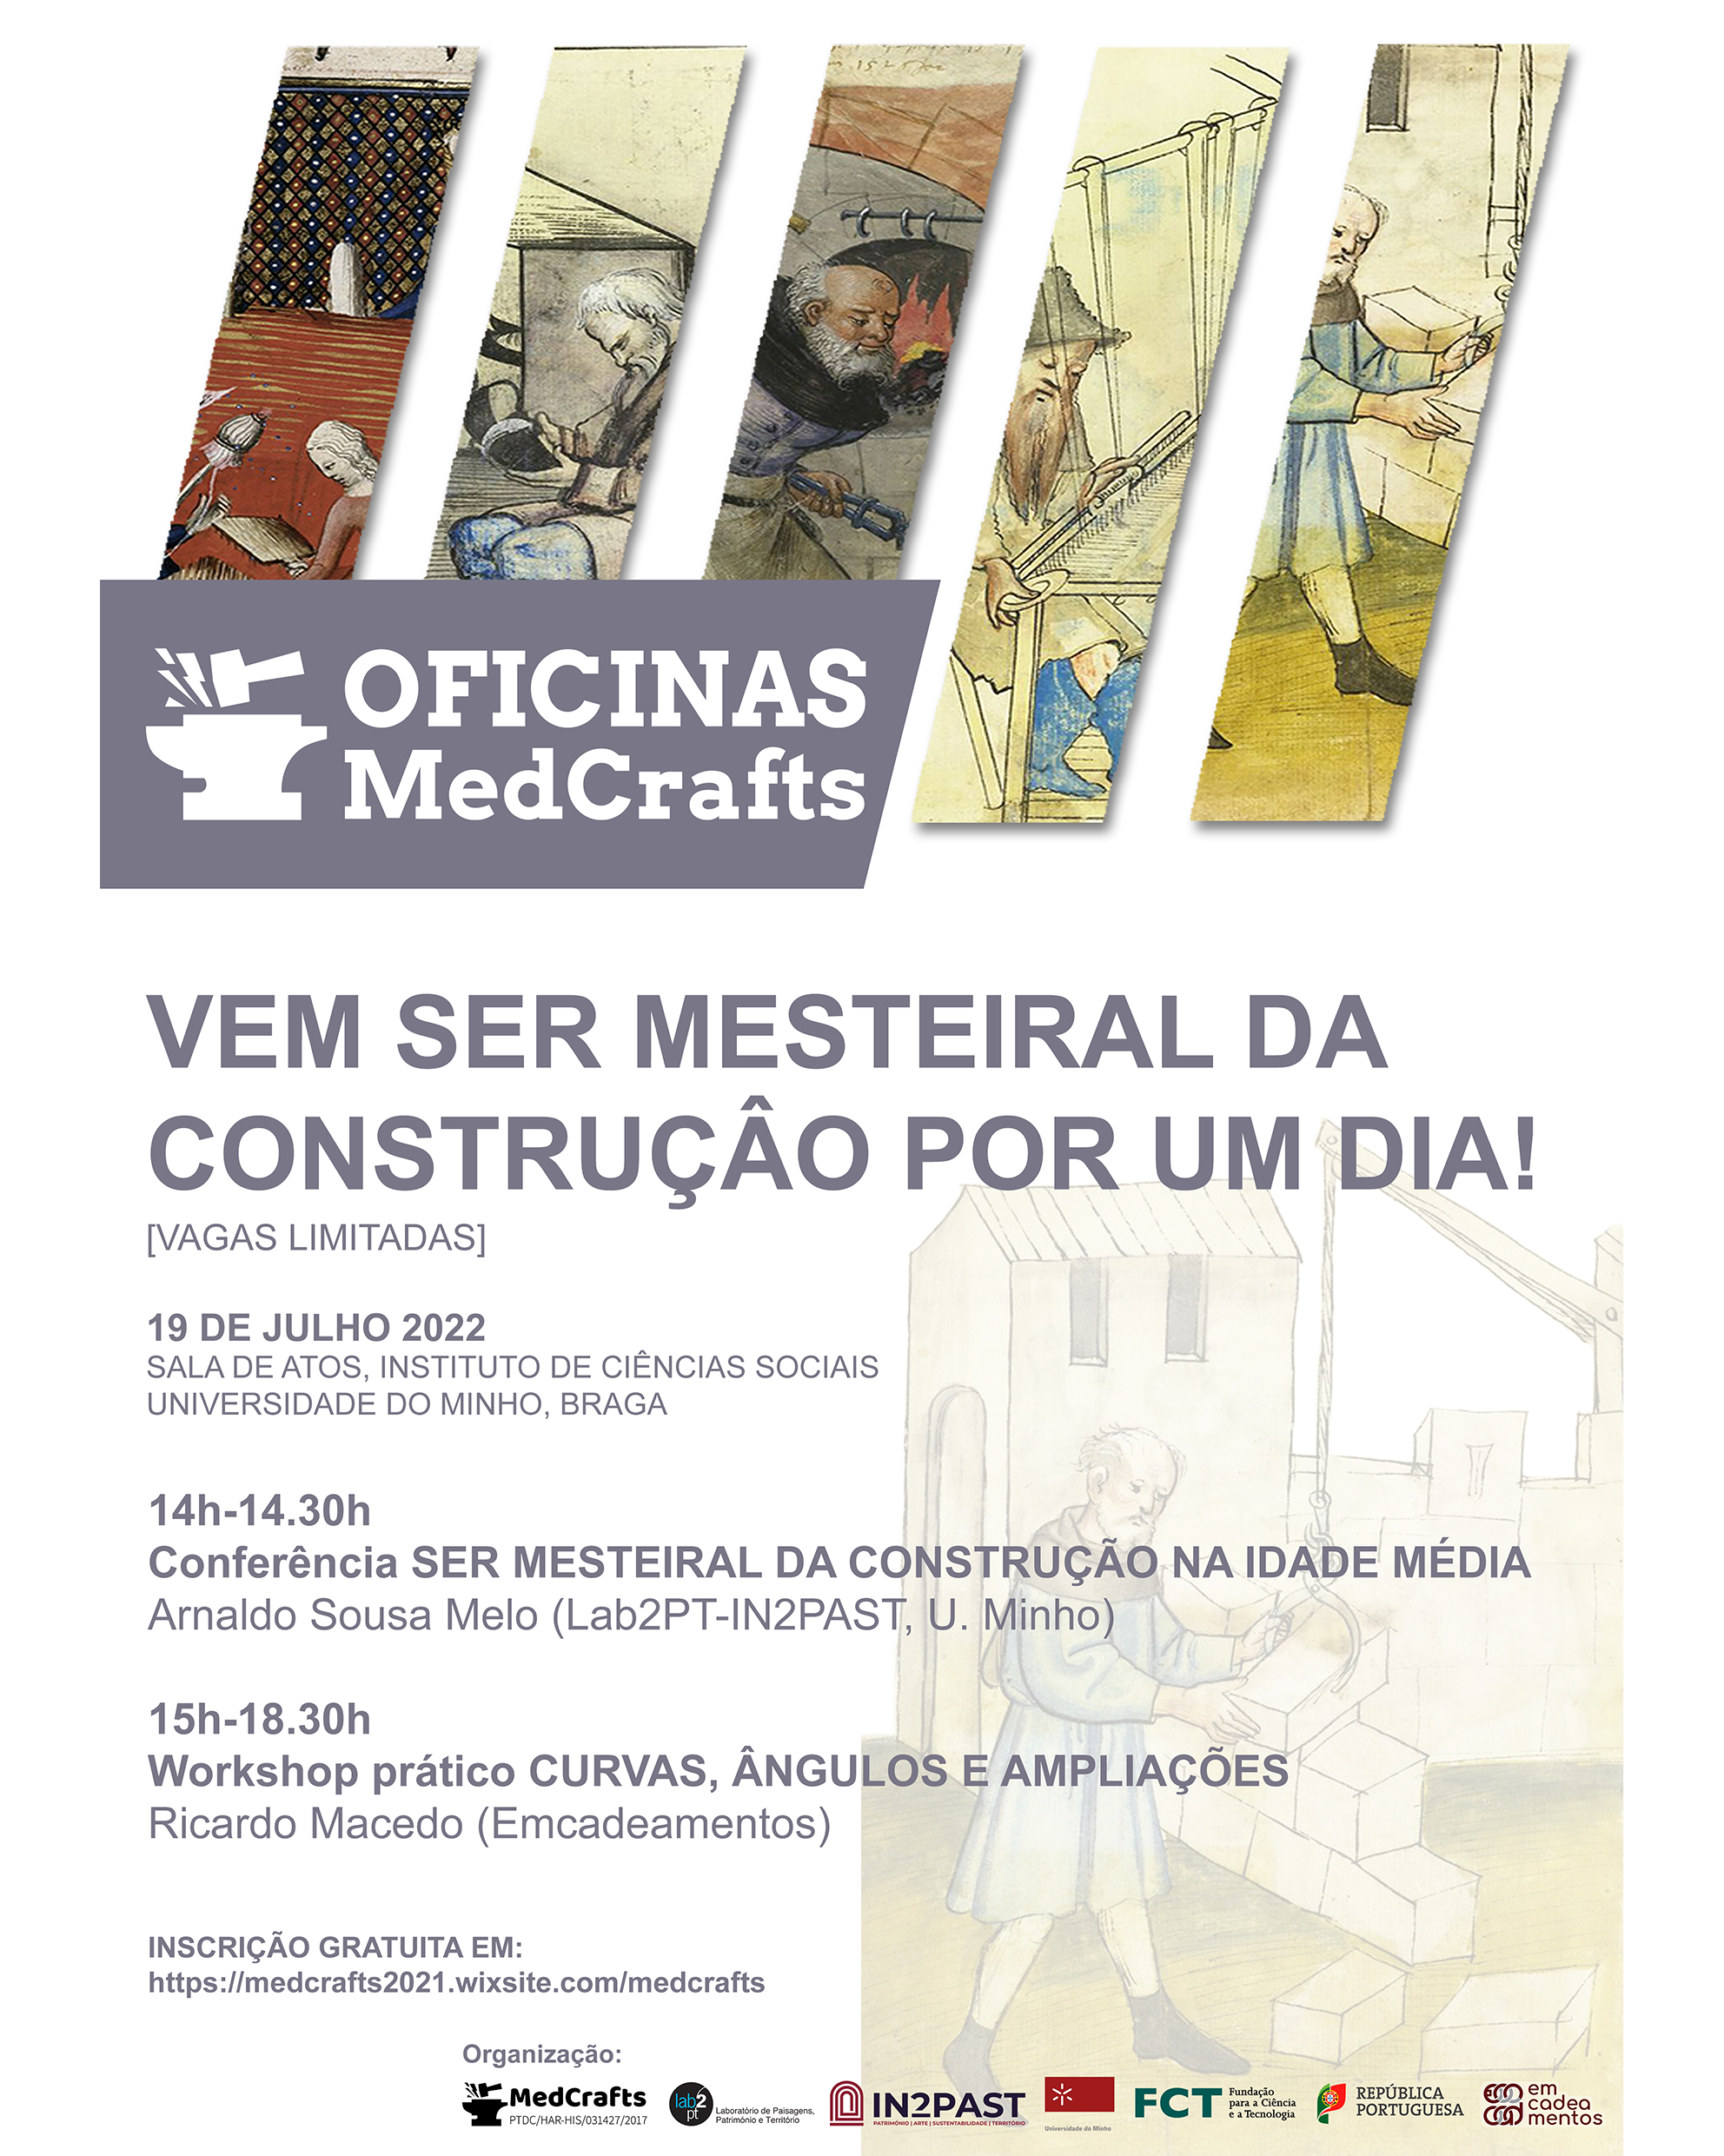 MedCrafts Workshops - cycle of conferences and hands-on workshops: "Being a construction craftsman in the Middle Ages" image